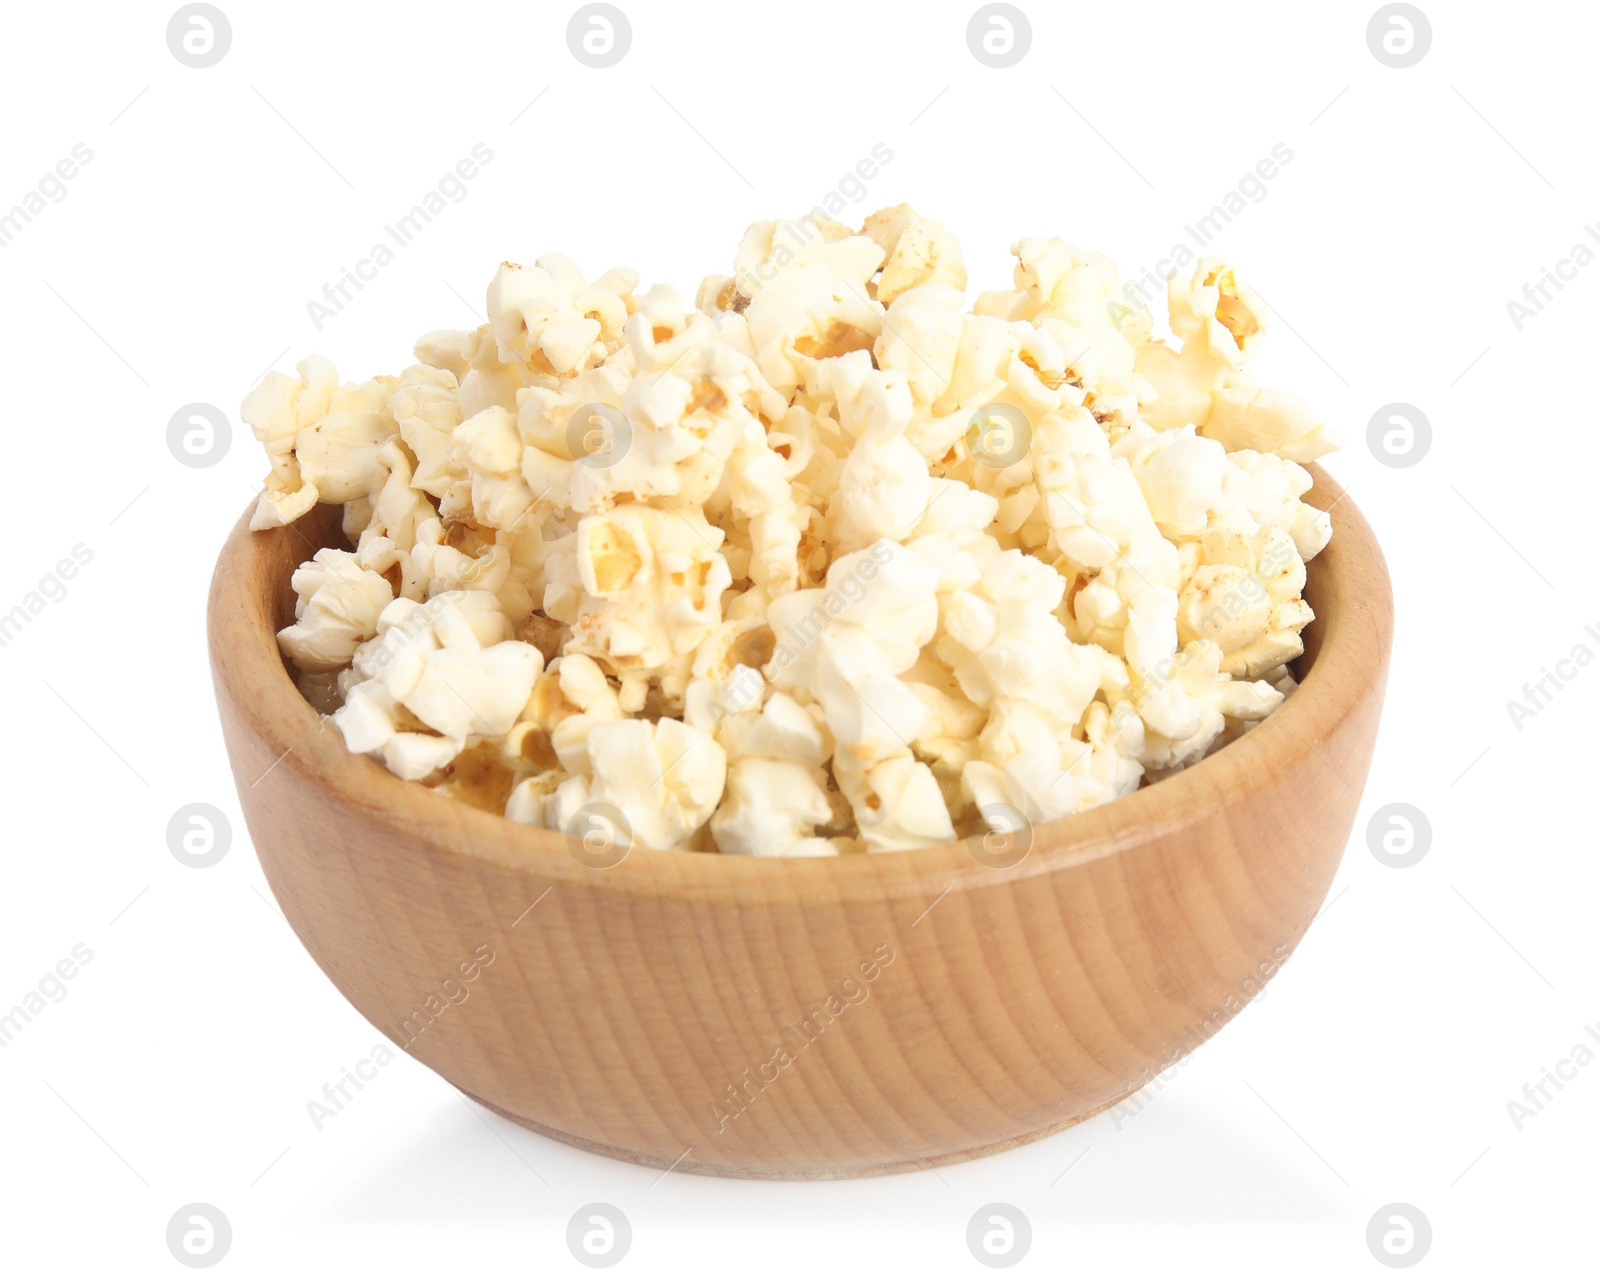 Photo of Wooden bowl of tasty pop corn isolated on white